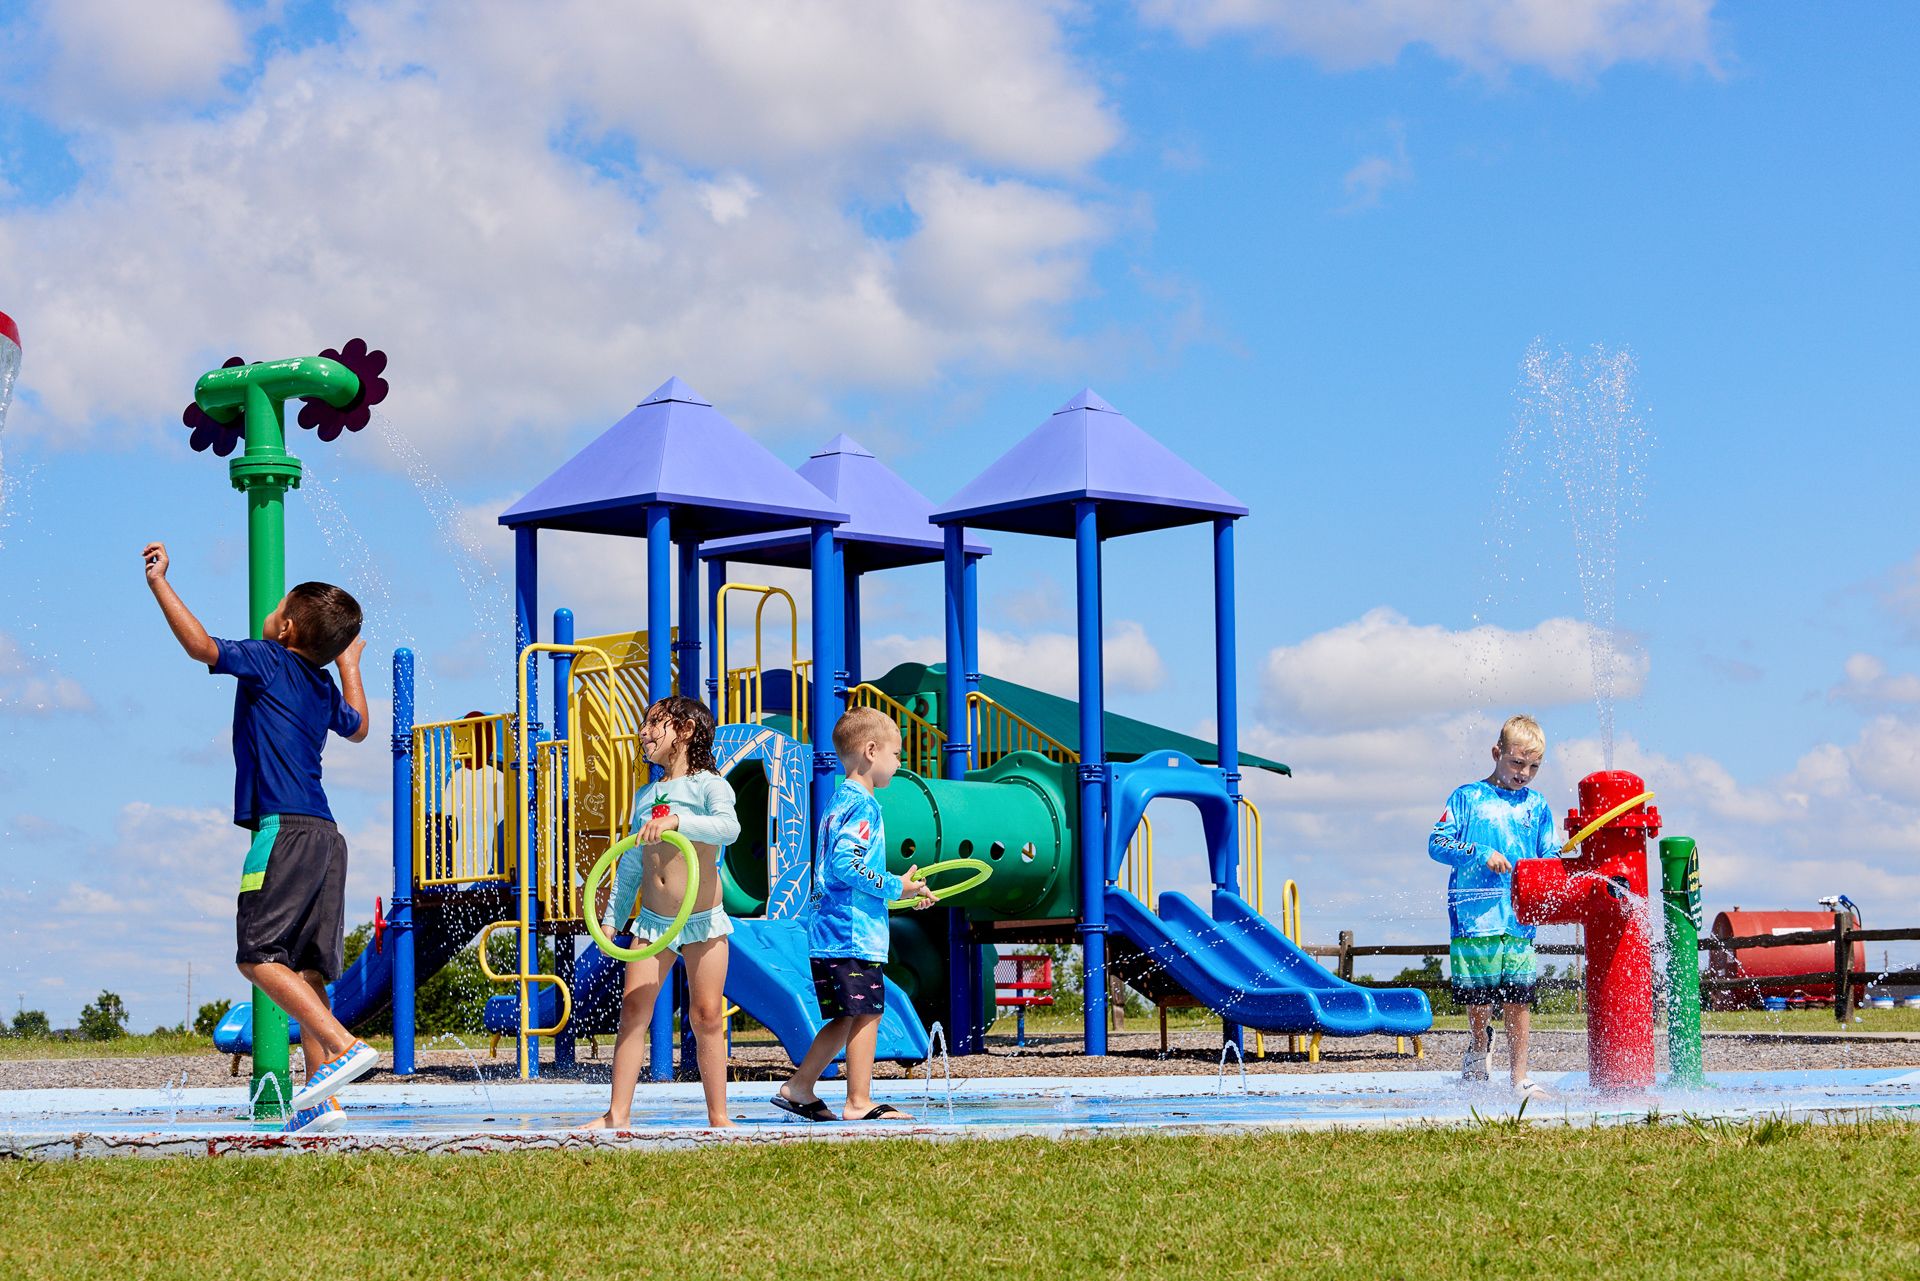 Children at the splashpad and playground in Featherstone - new homes in Moore, OK:Splash pad and playground